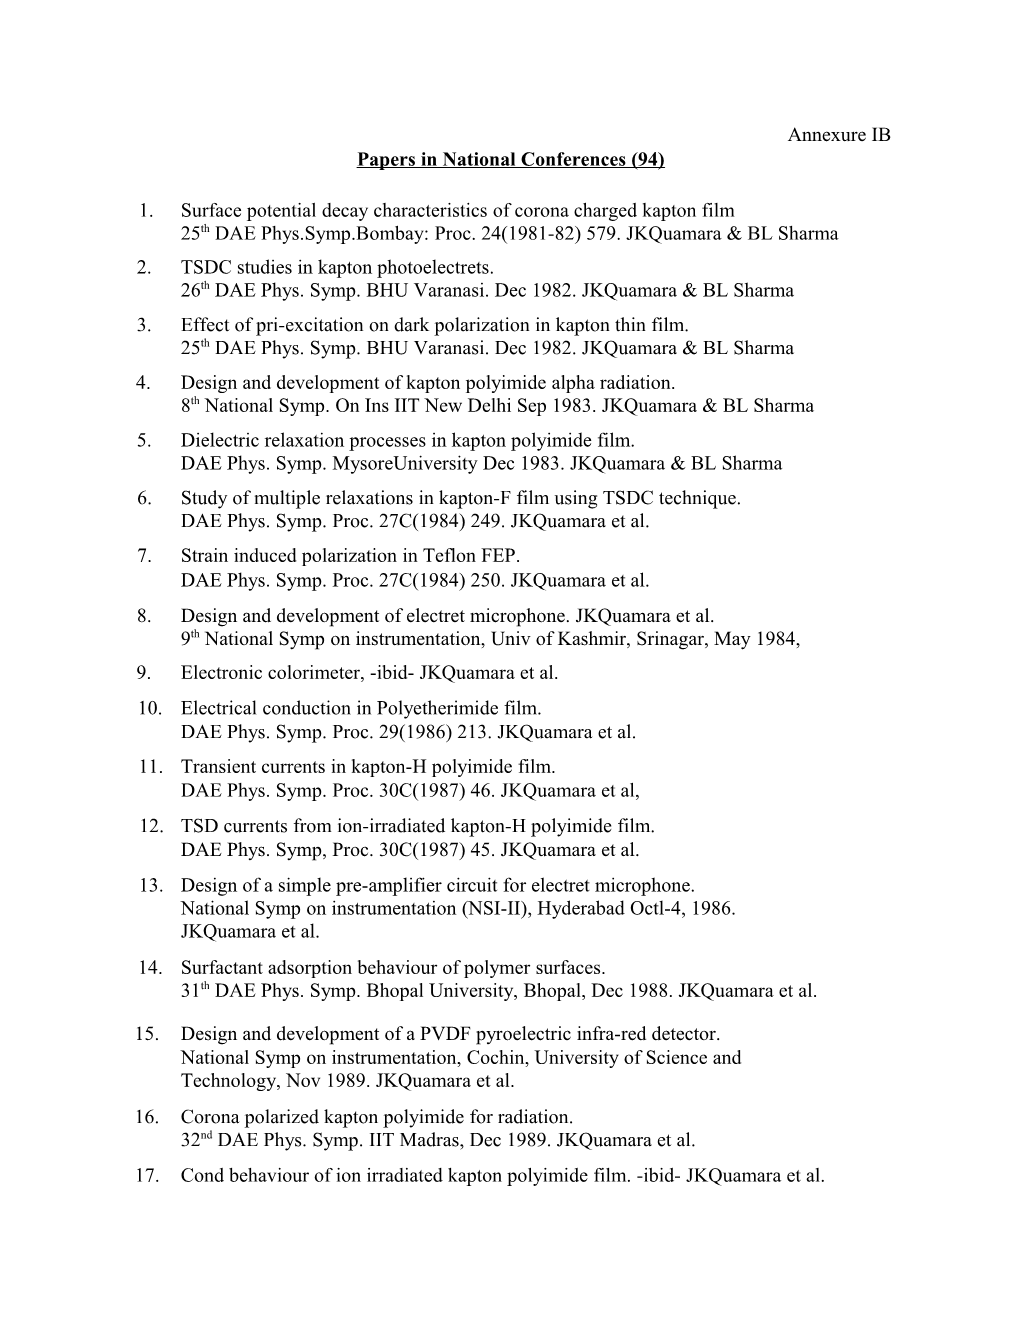 Papers in National Conferences (94)